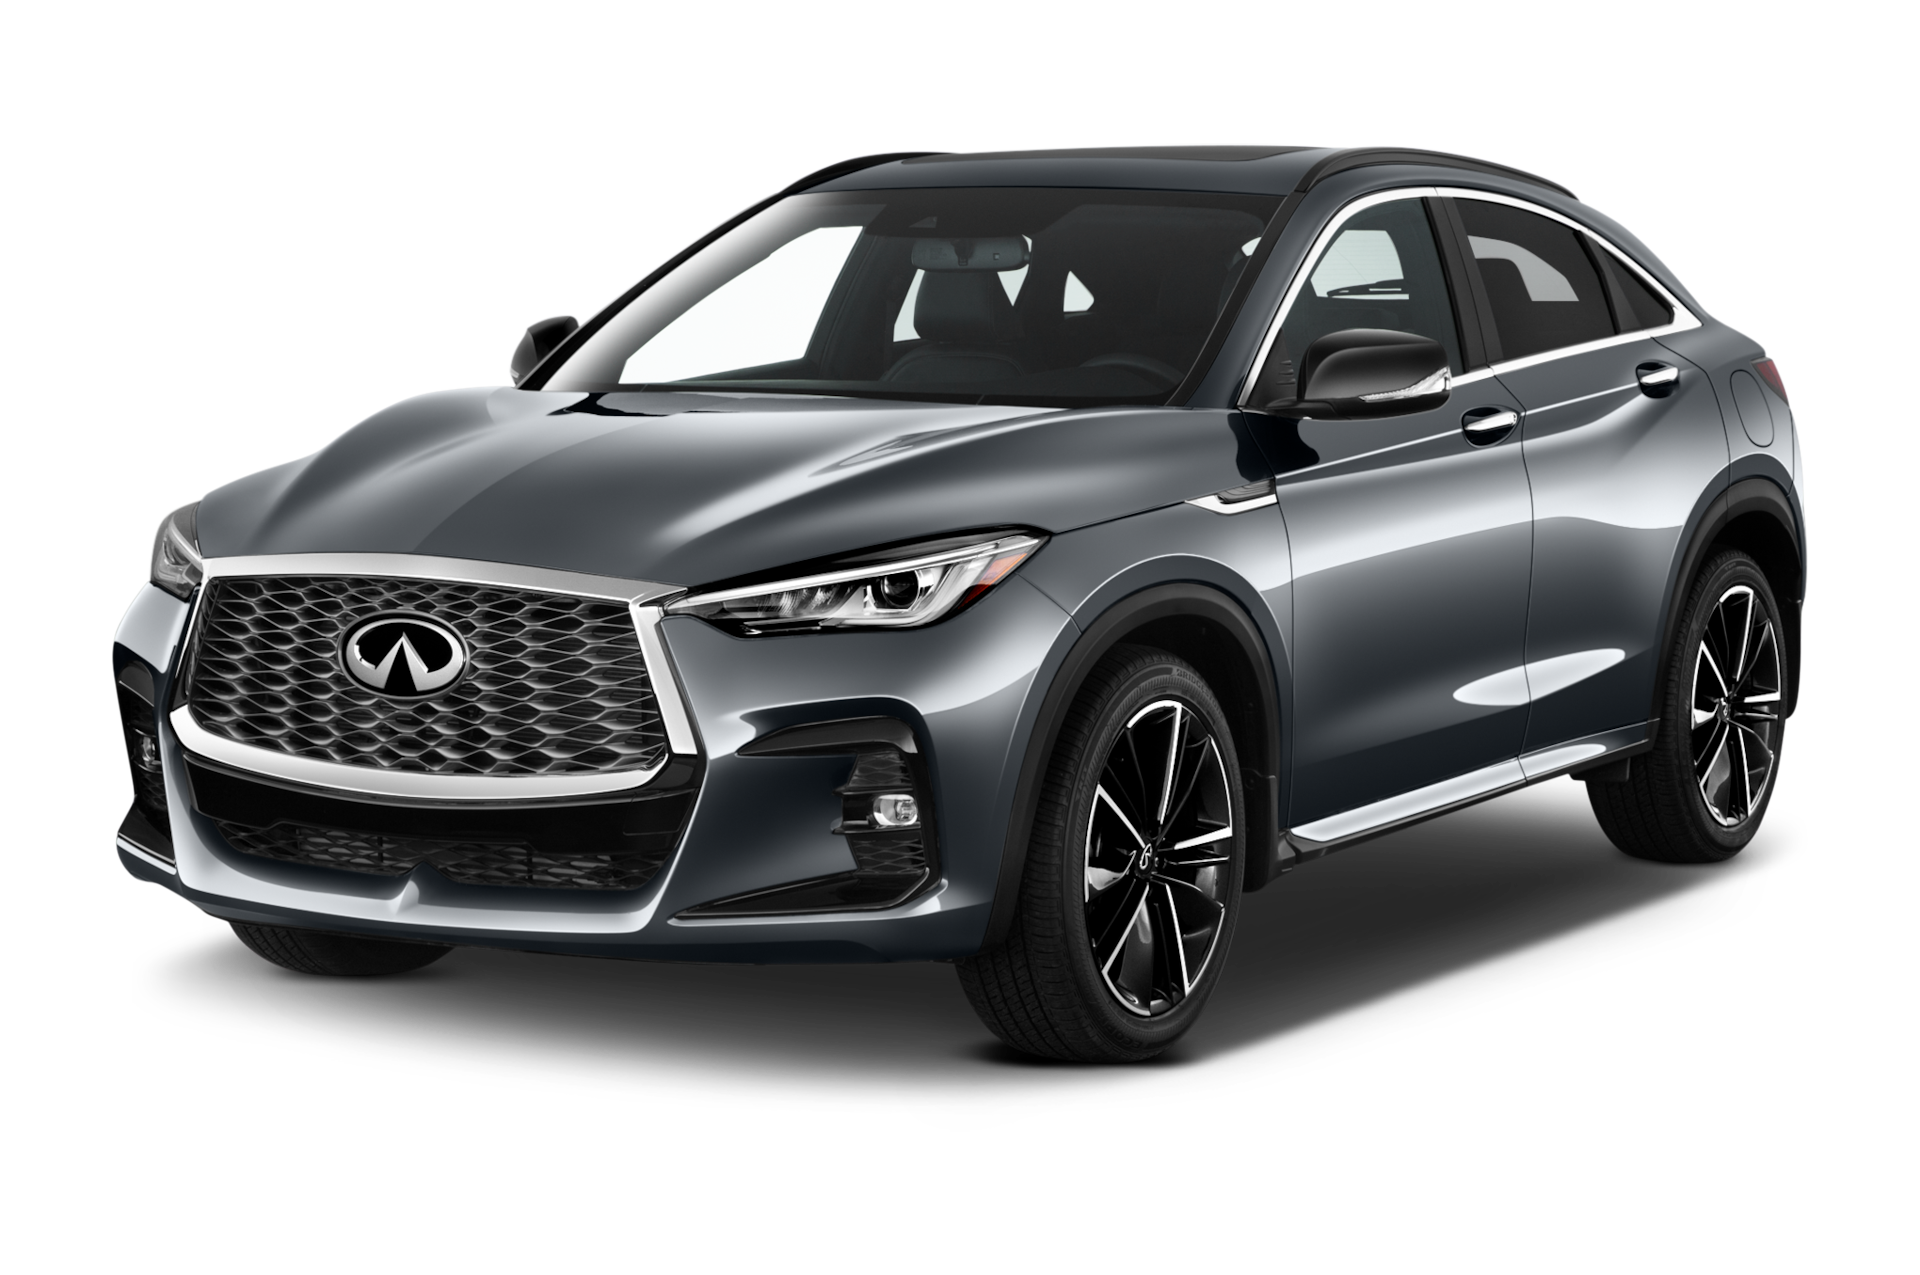 Infiniti Prices, Reviews, and Photos - MotorTrend